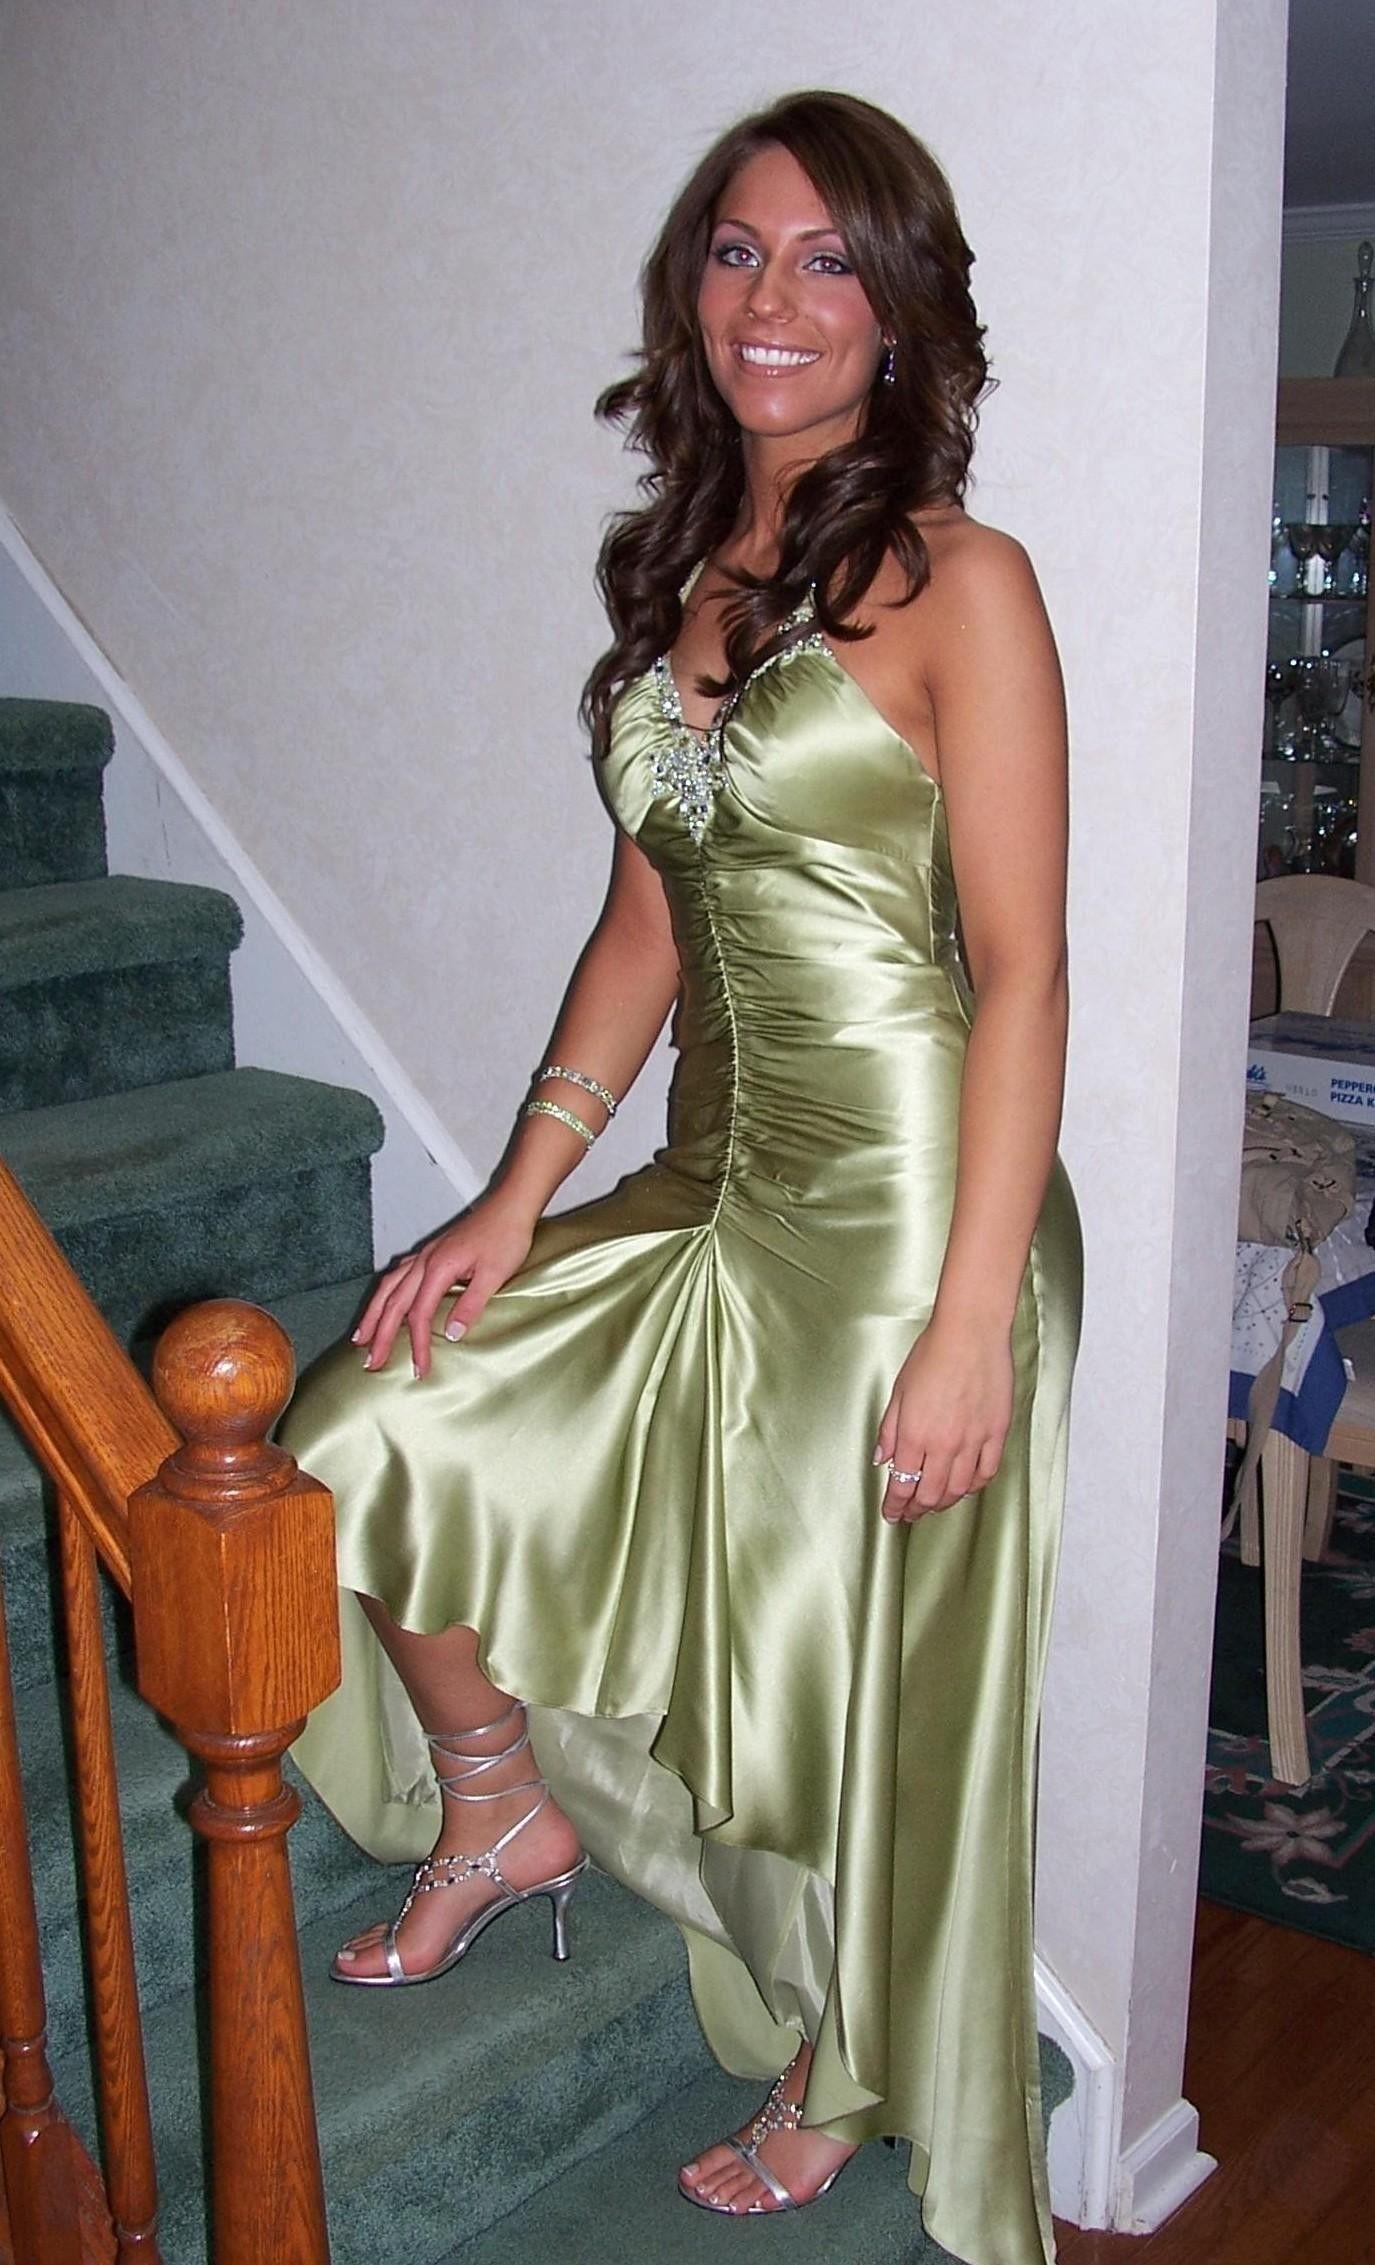 Prom dress. HD porn free site pic. Comments: 2